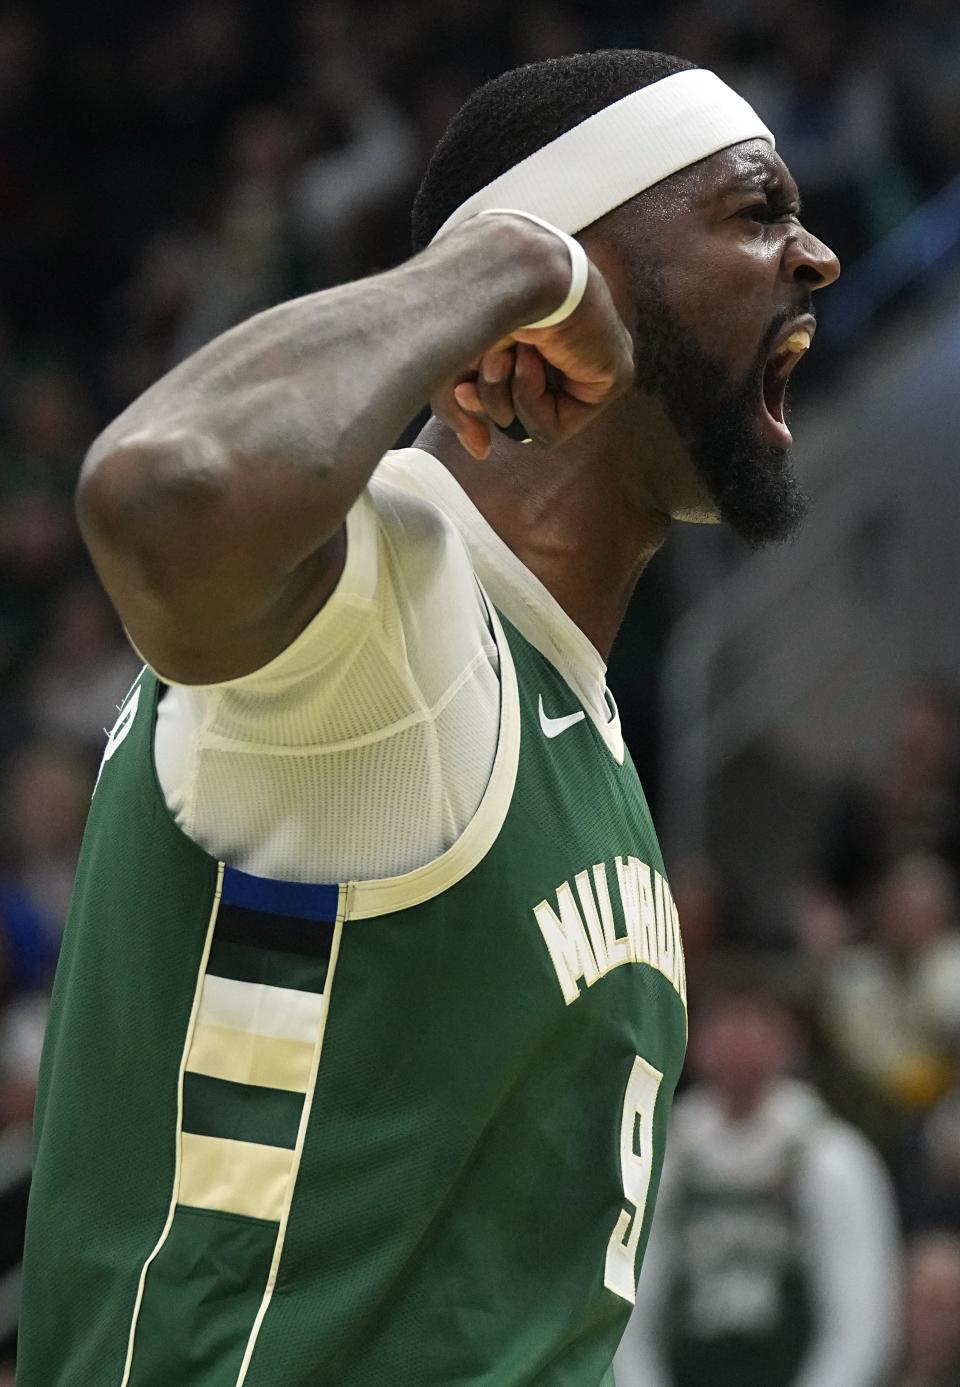 Bucks forward Bobby Portis celebrates a basket Saturday night. He scored 31 points against the Pistons, the most he has since joining the Bucks.